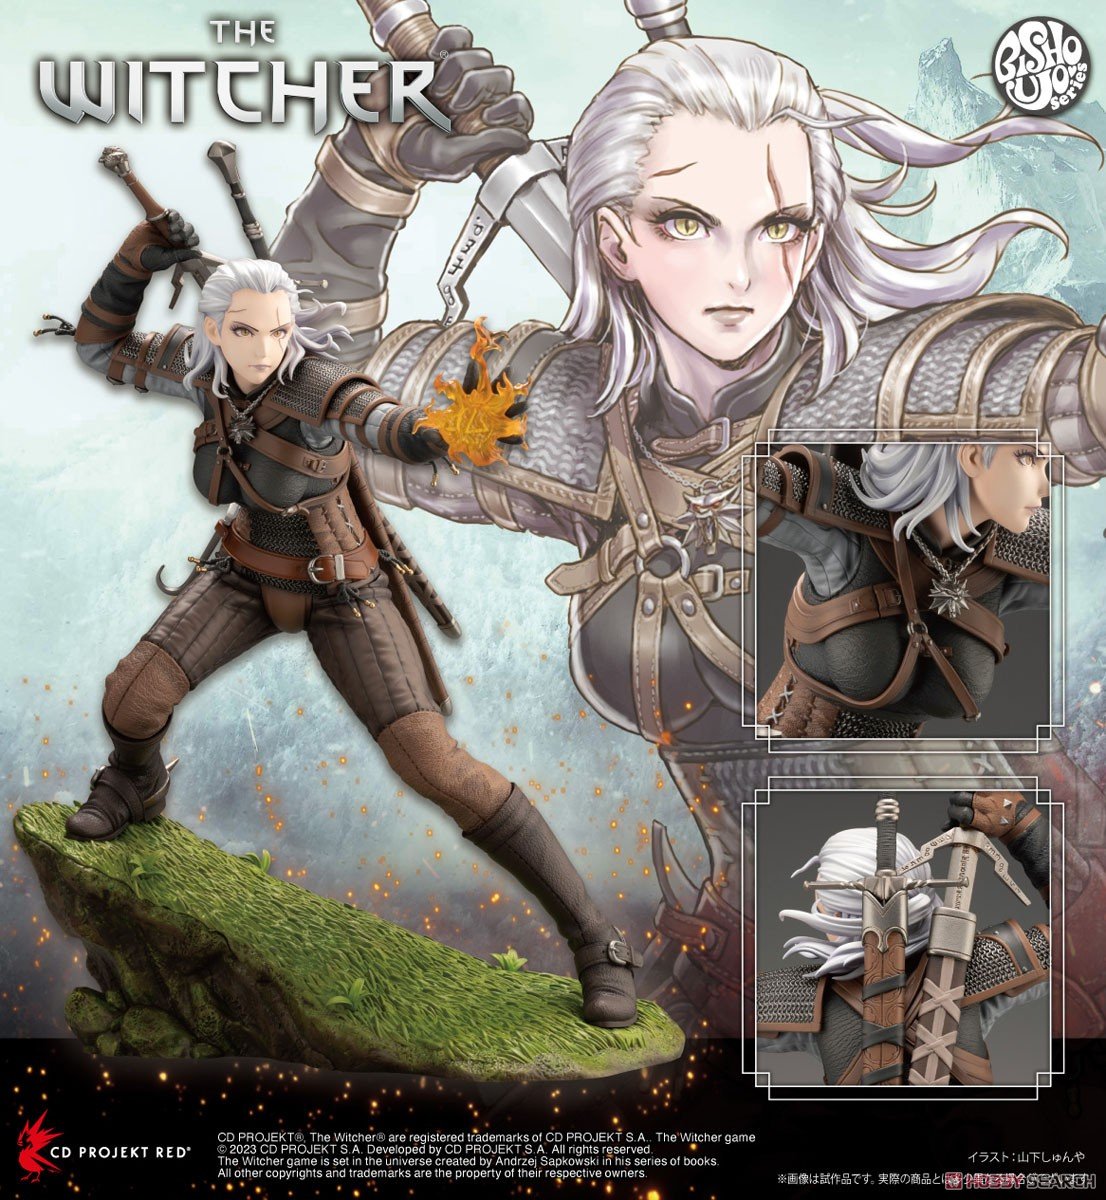 THE WITCHER美少女『ゲラルト』ウィッチャー 1/7 完成品フィギュア-018